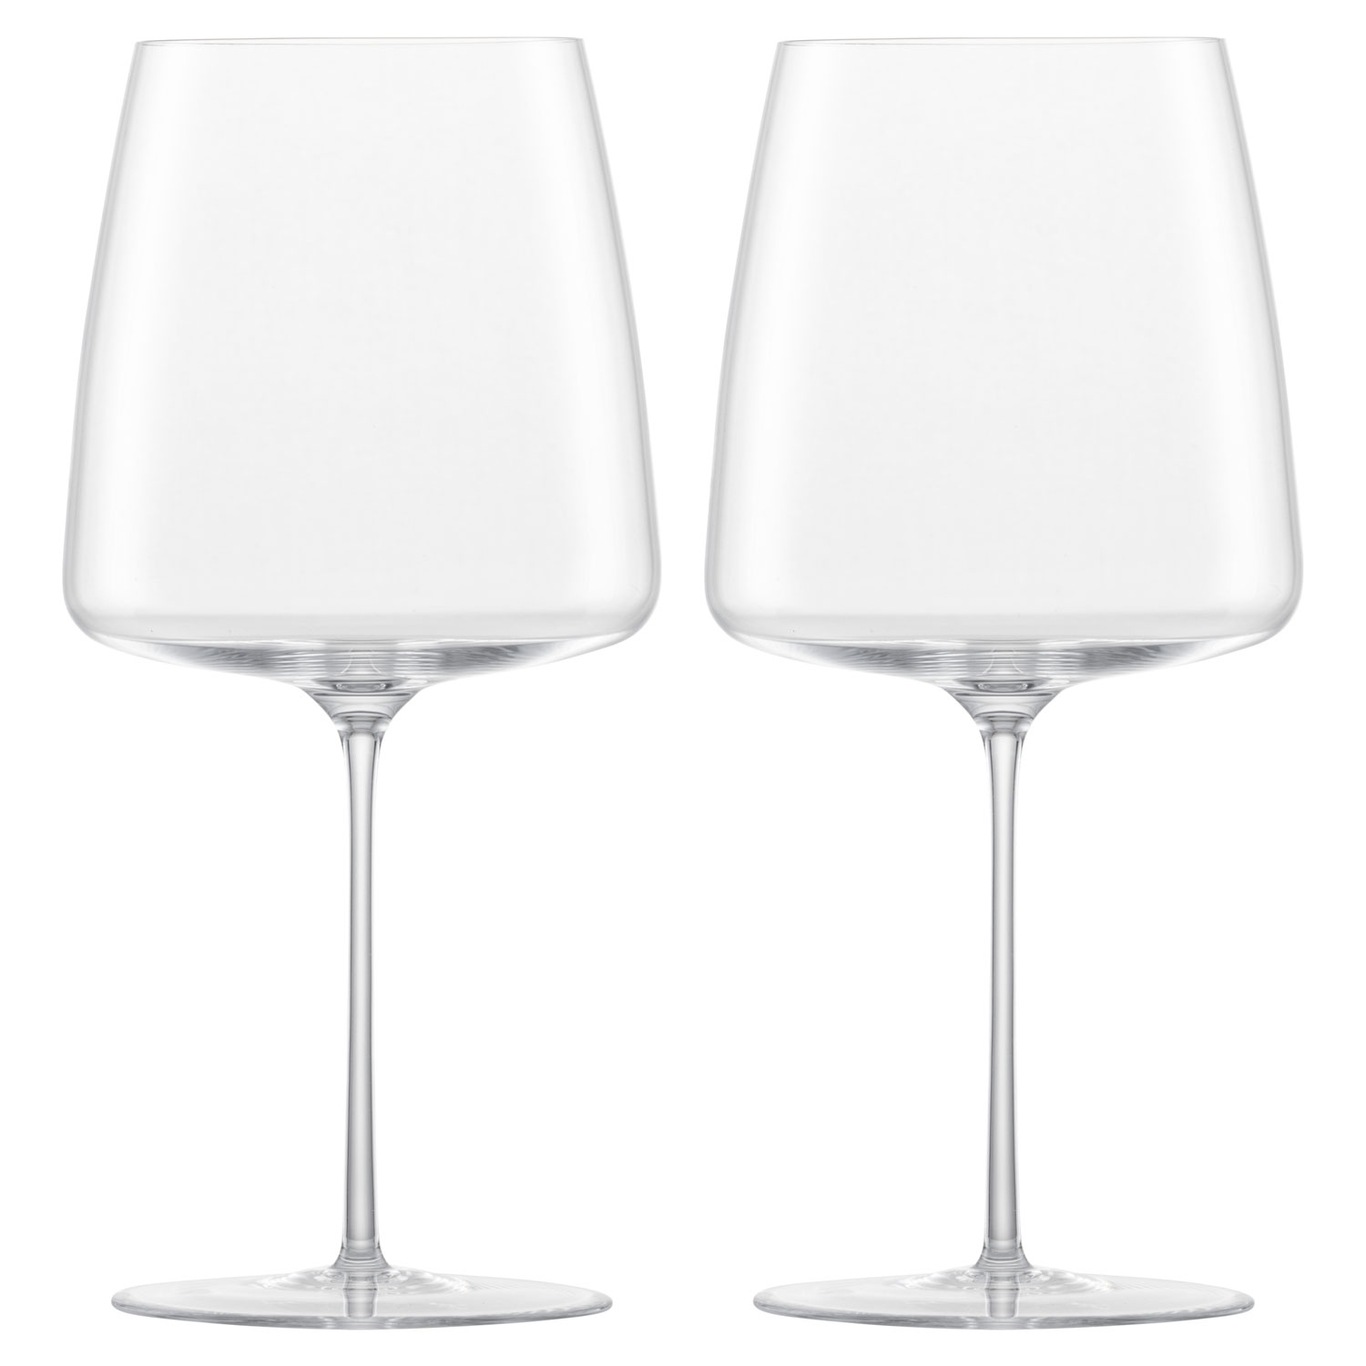 Simplify Velvety & Sumptuous Wine Glass 74 cl, 2-pack